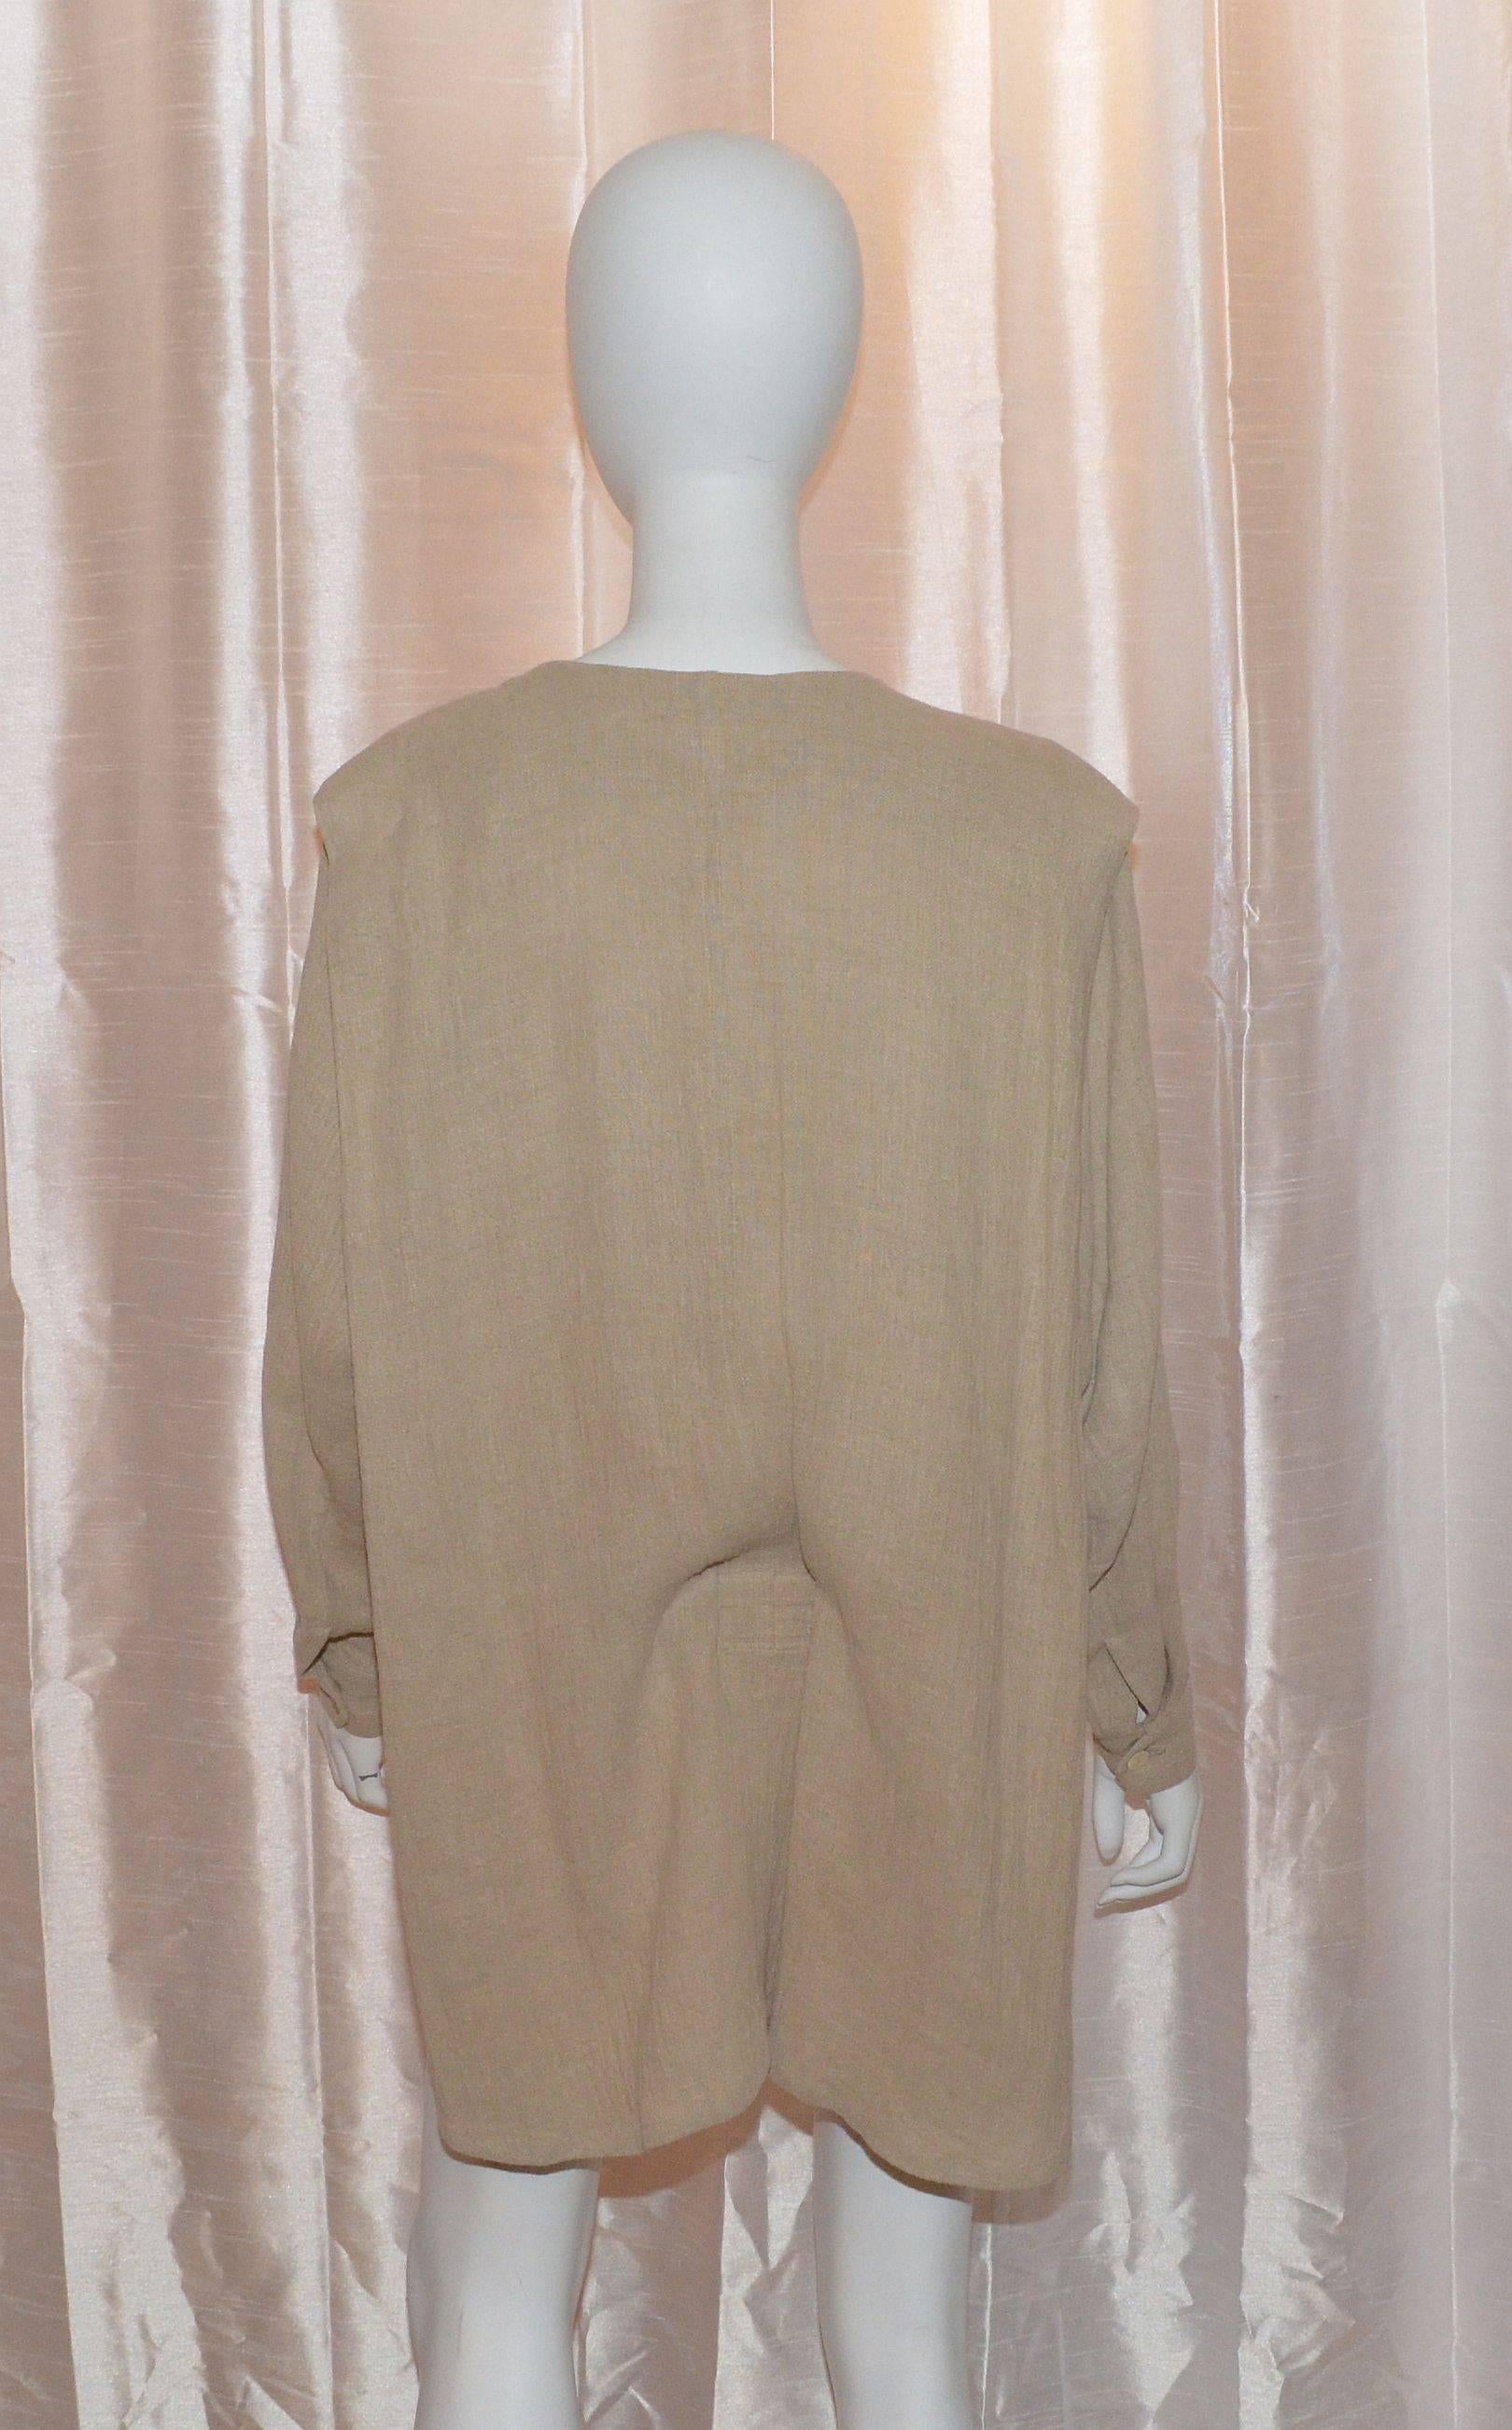 Vintage Issey Miyake jacket is a size S, made in Japan, and 100% linen. Jacket is short in the front and long in the back. Draped design. There are button closures along the front and on the cuffs, drawstrings at the front hem, and a vertical pocket